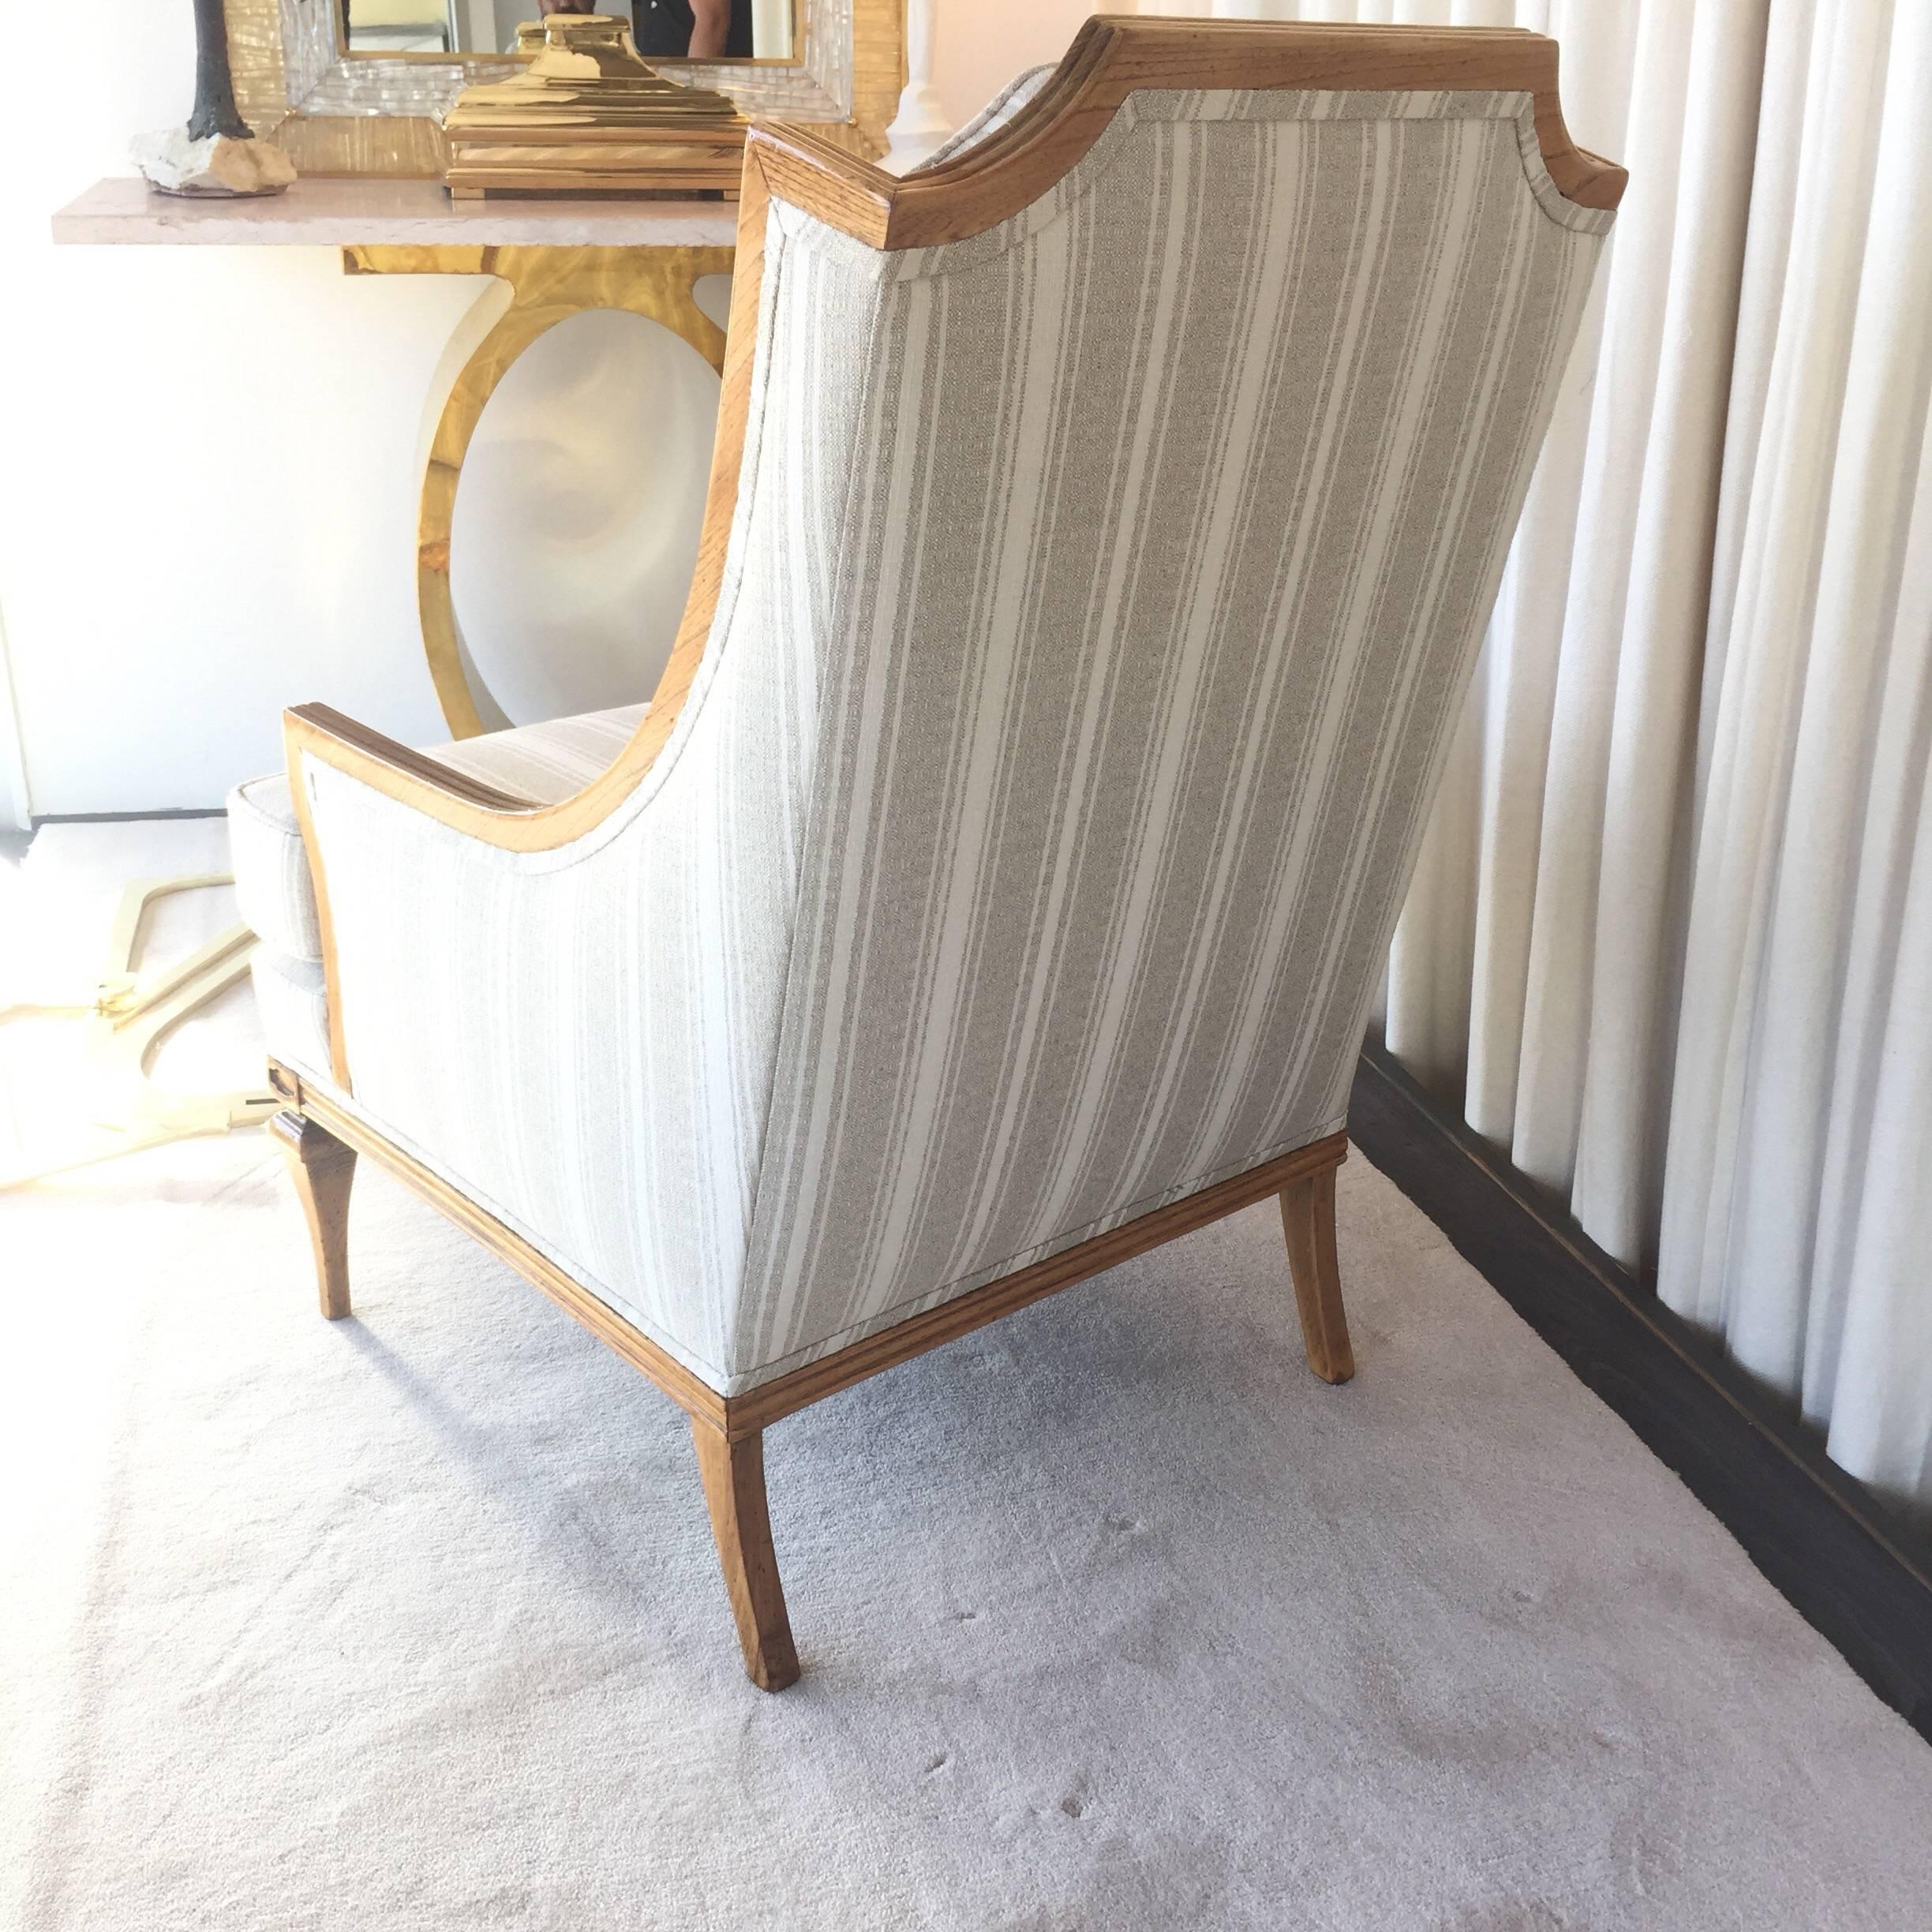 Stripped wood frame showing the natural wood, high gloss lacquer applied to accentuate the beauty and details of these chairs. Exceptionally upholstered in a striped natural Belgian heavy linen.